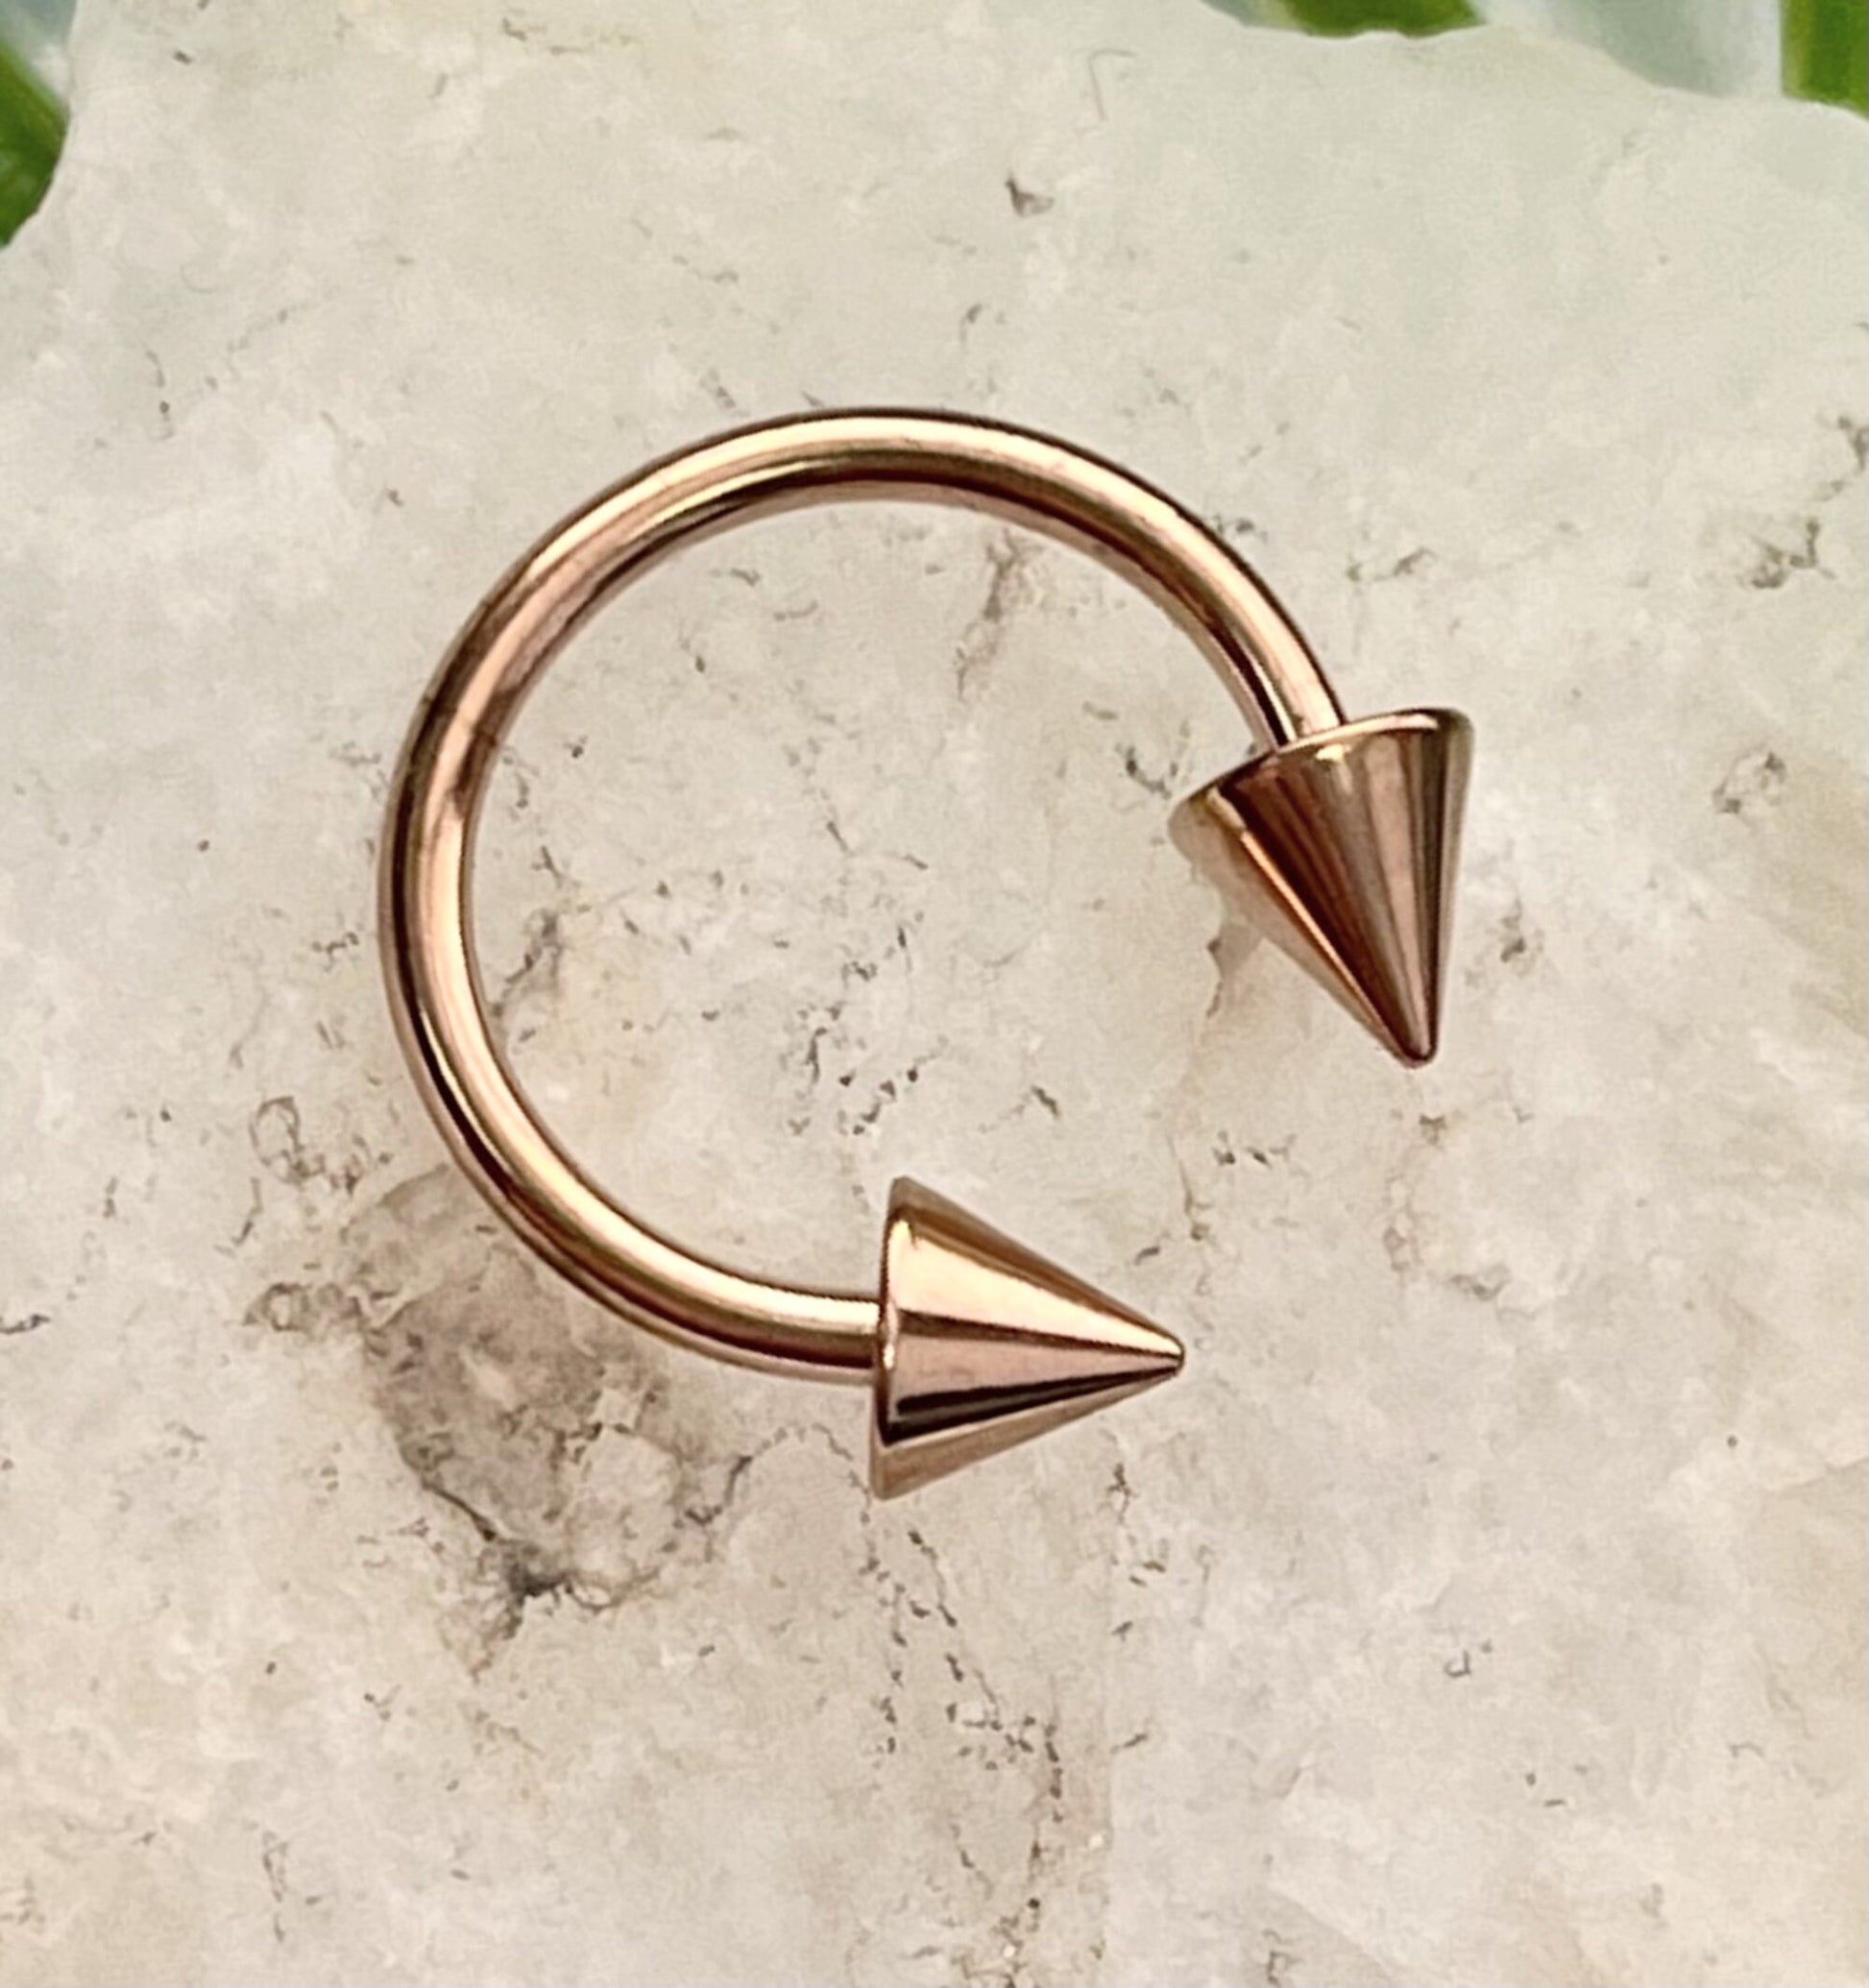 1 Piece Stunning Rose Gold Spiked Circular Barbell Horseshoe Ring - 16g, 14g- Internal Diameter 6mm, 8mm, 10mm Available!